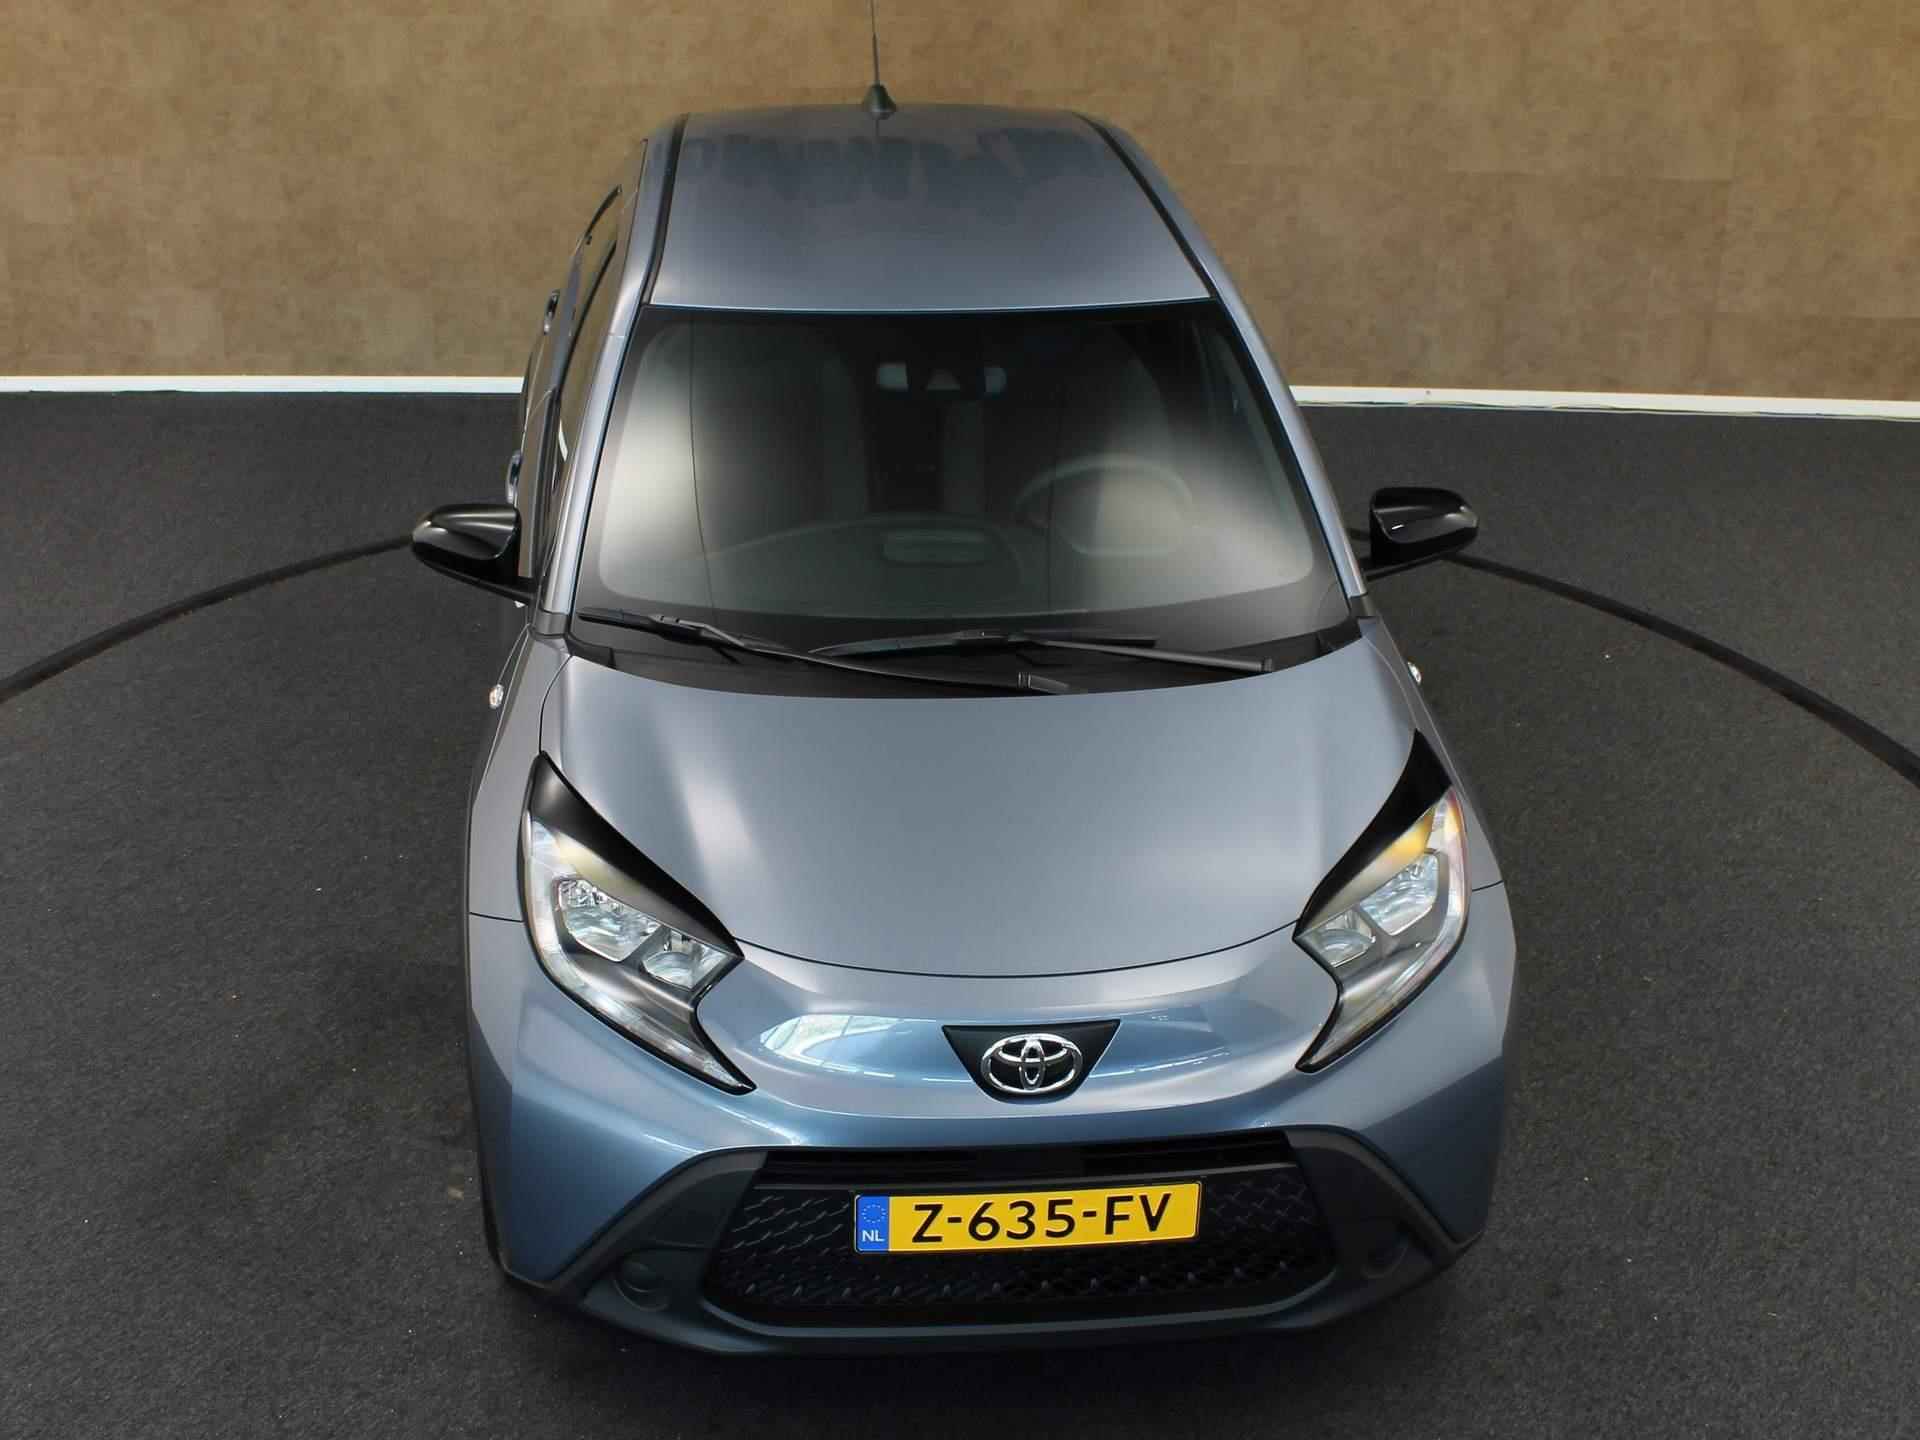 Toyota Aygo X 1.0 VVT-i S-CVT play DIRECT UIT VOORRAAD LEVERBAAR! - AUTOMAAT - APPLE CARPLAY/ANDROID AUTO - AIRCO - 13/28